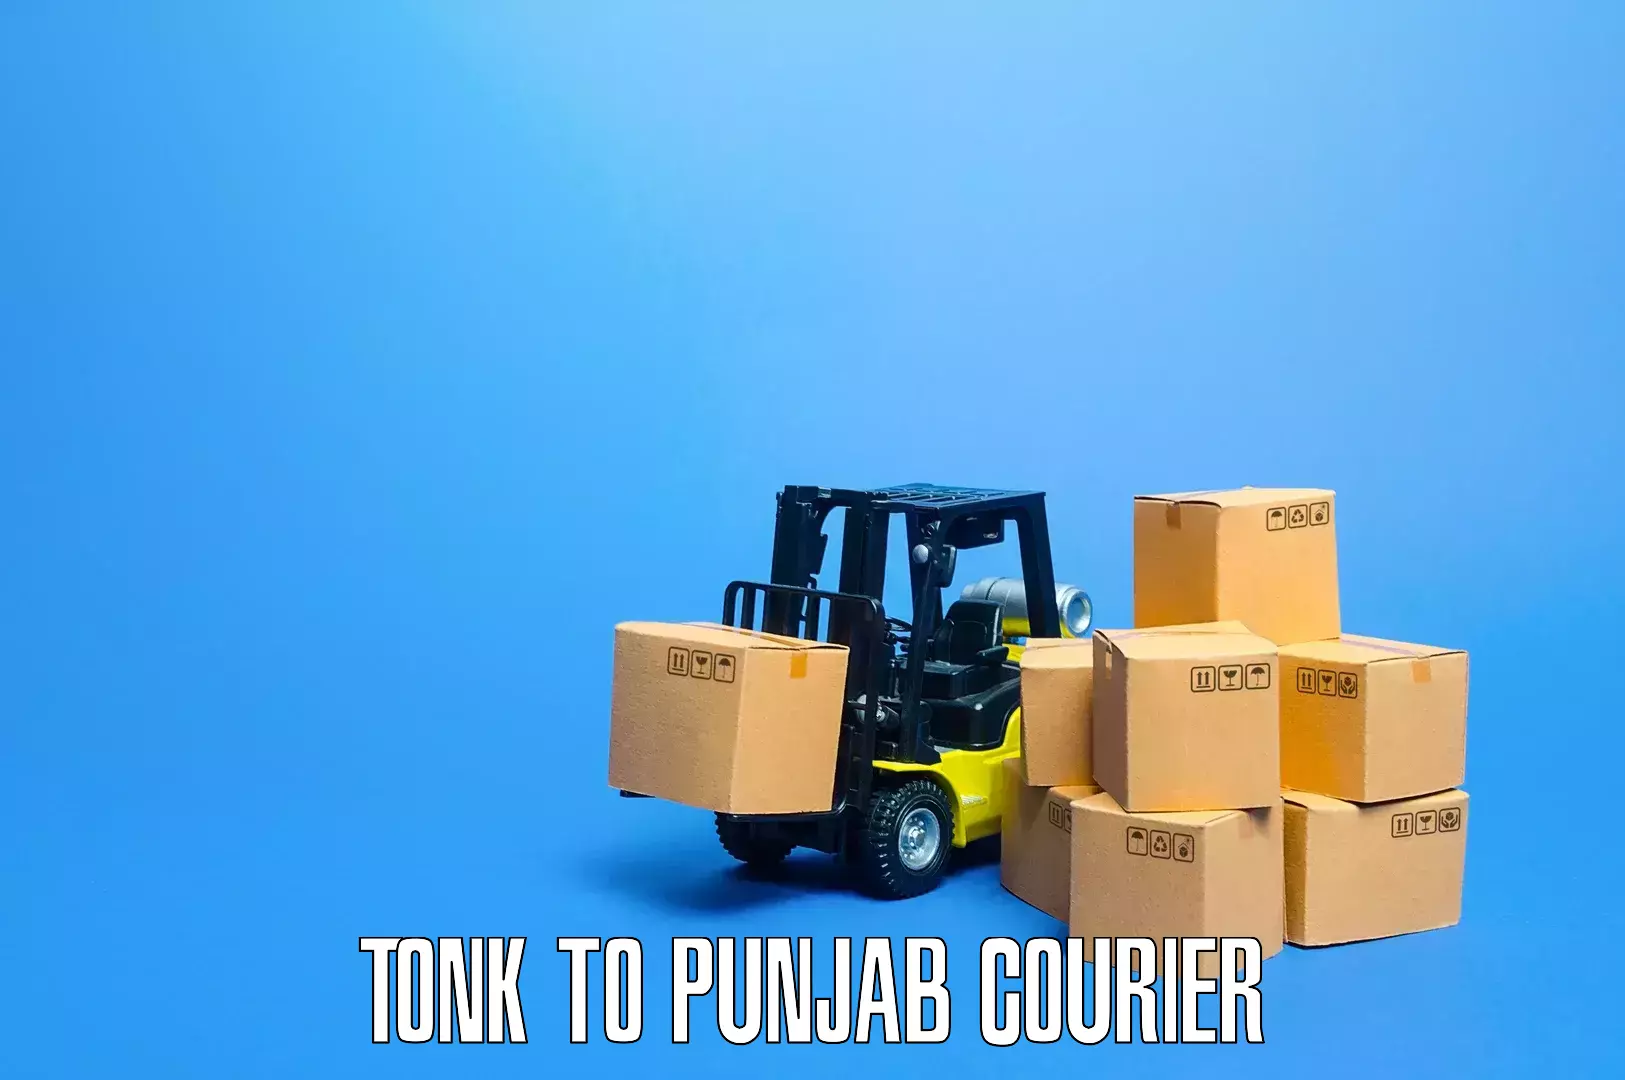 Quality household movers Tonk to Punjab